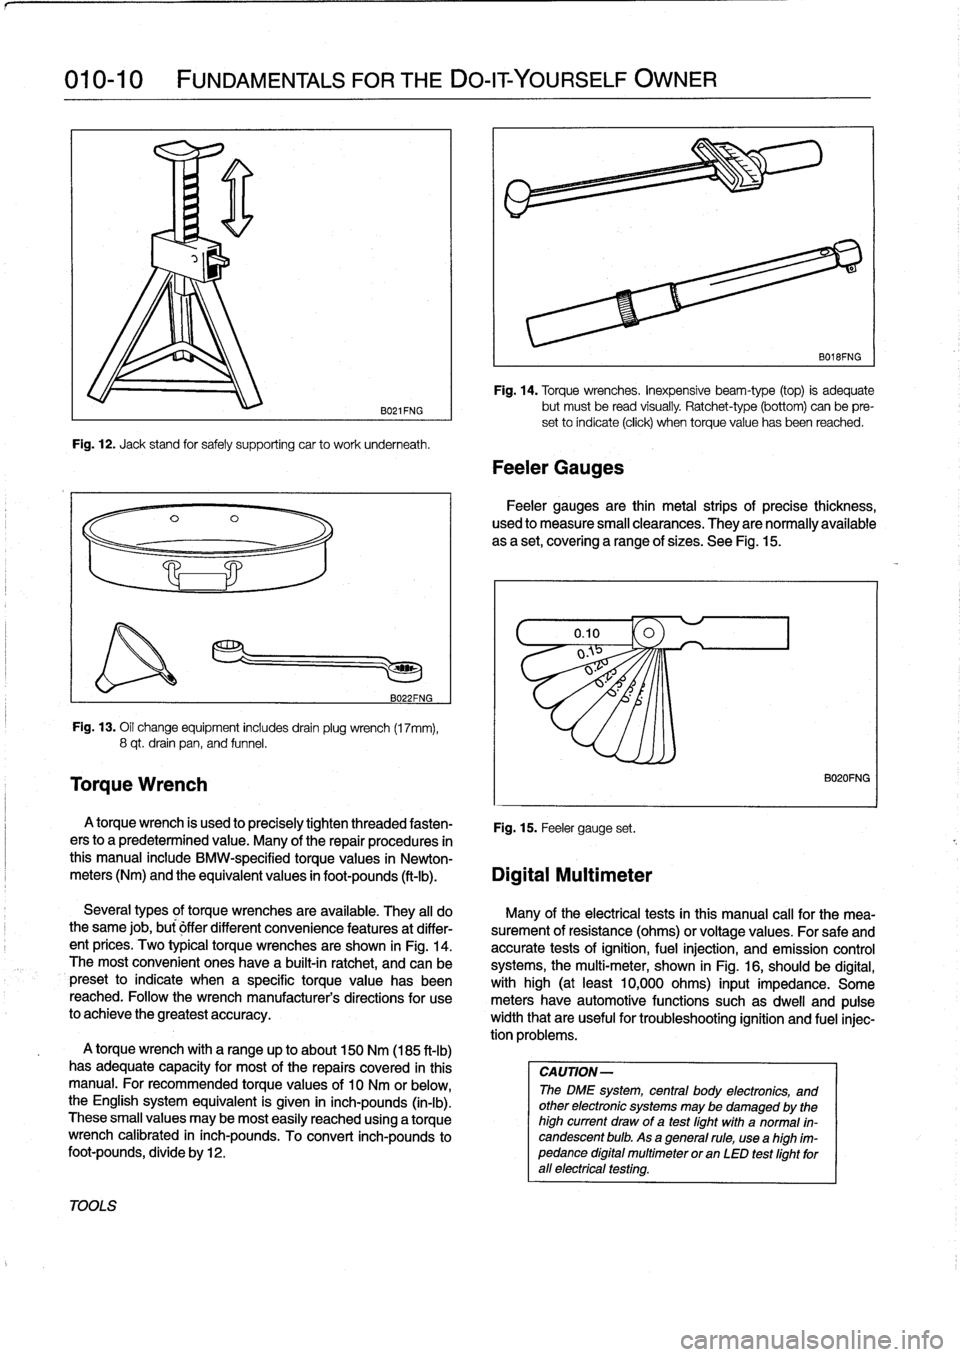 BMW M3 1993 E36 Workshop Manual 
010-10

	

FUNDAMENTALS
FOR
THE
DO-IT
YOURSELF
OWNER

TOOLS

Torque
Wrench

B021FNG

Fig
.
12
.
Jack
stand
for
safely
supporting
car
to
work
underneath
.

B022FNG

Fig
.
13
.
Oil
change
equipment
inc